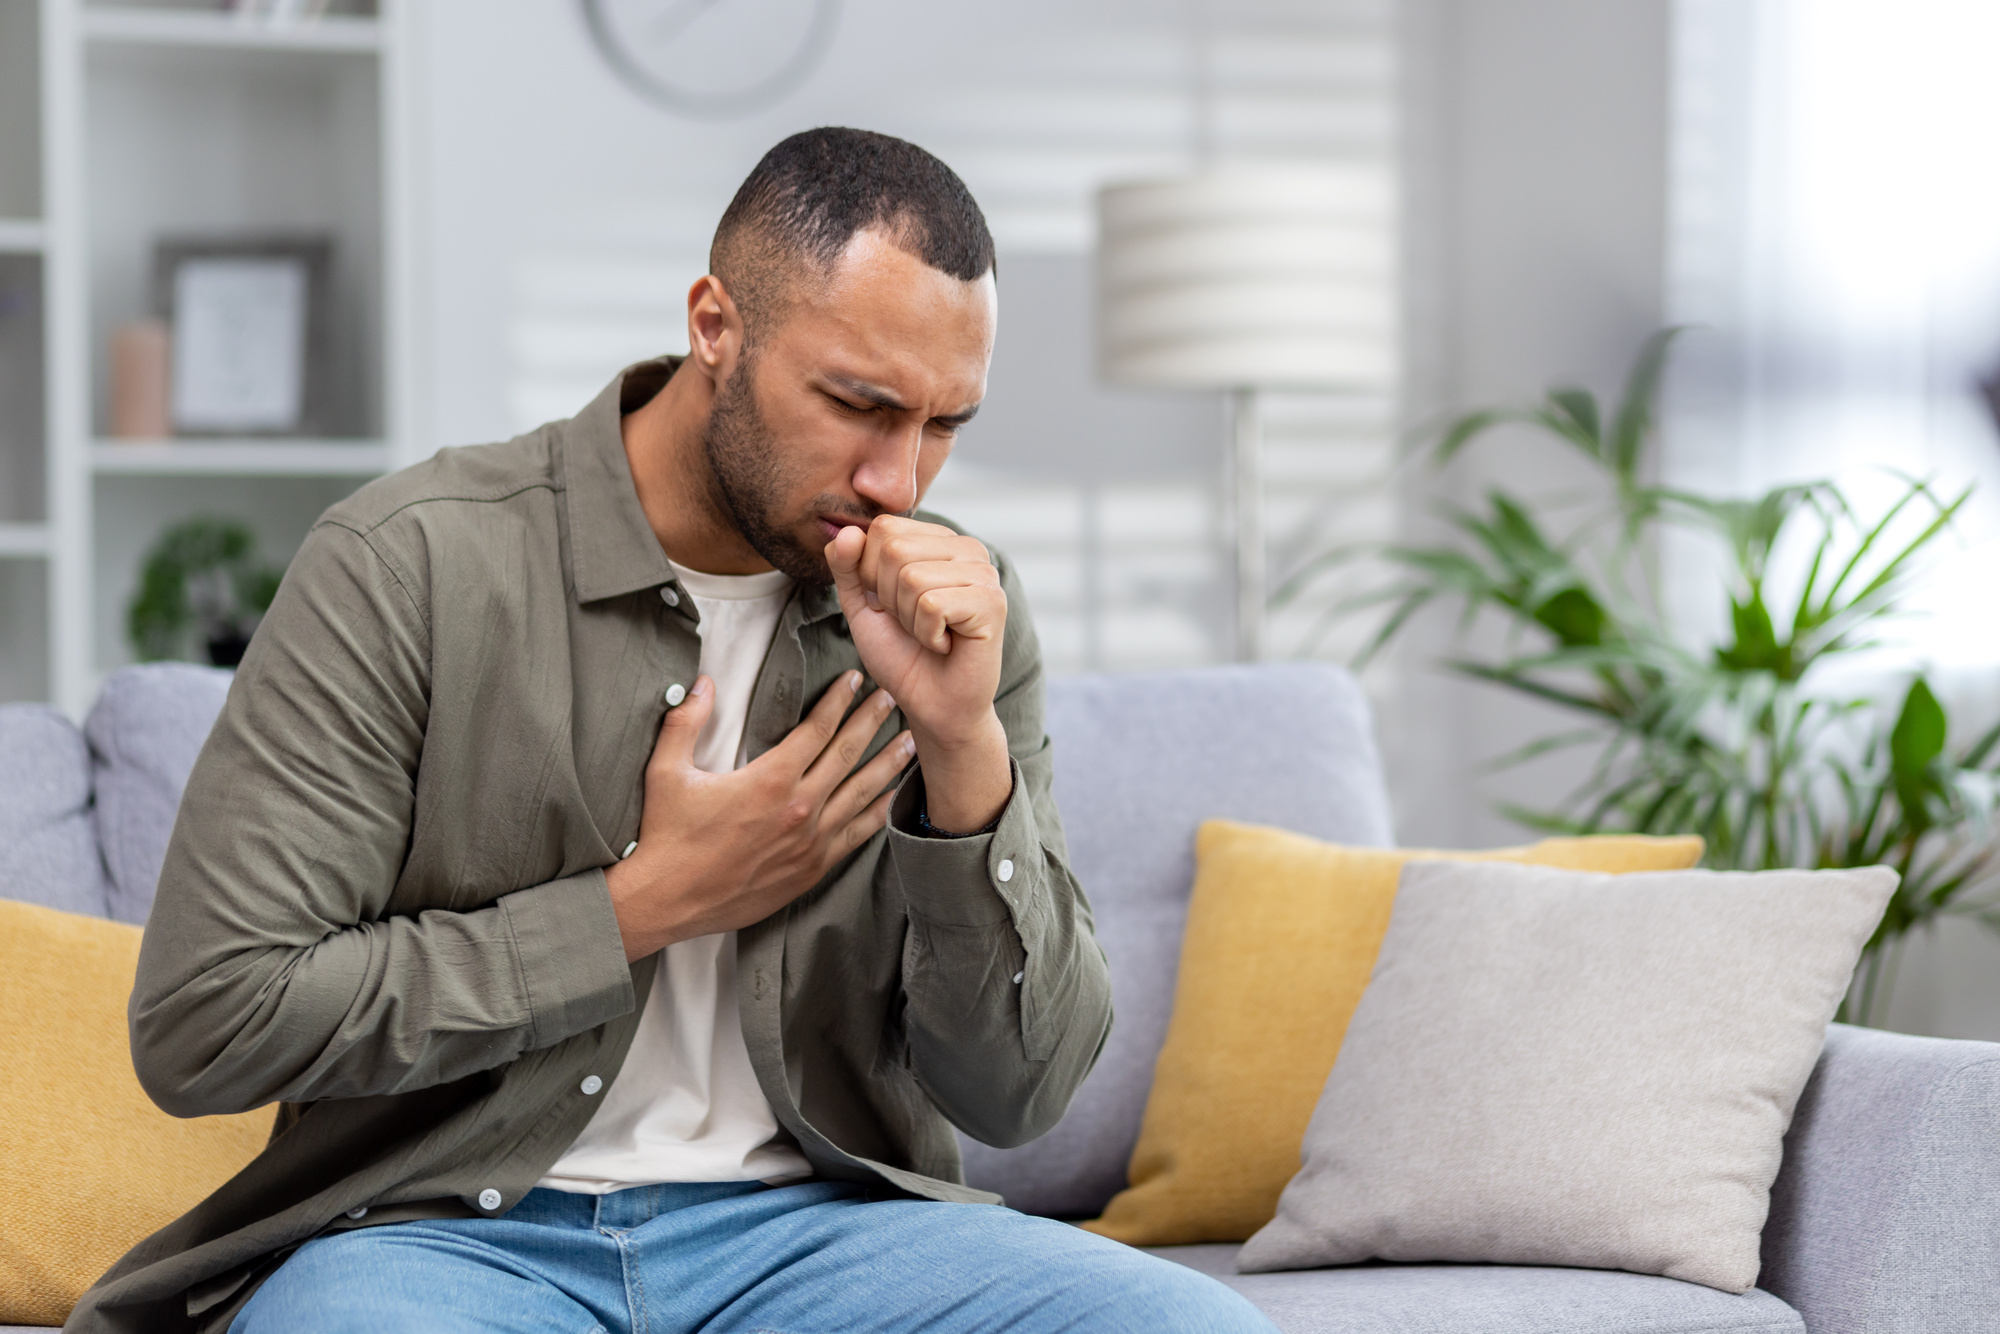 Indoor Air Quality: Effects On Respiratory Health